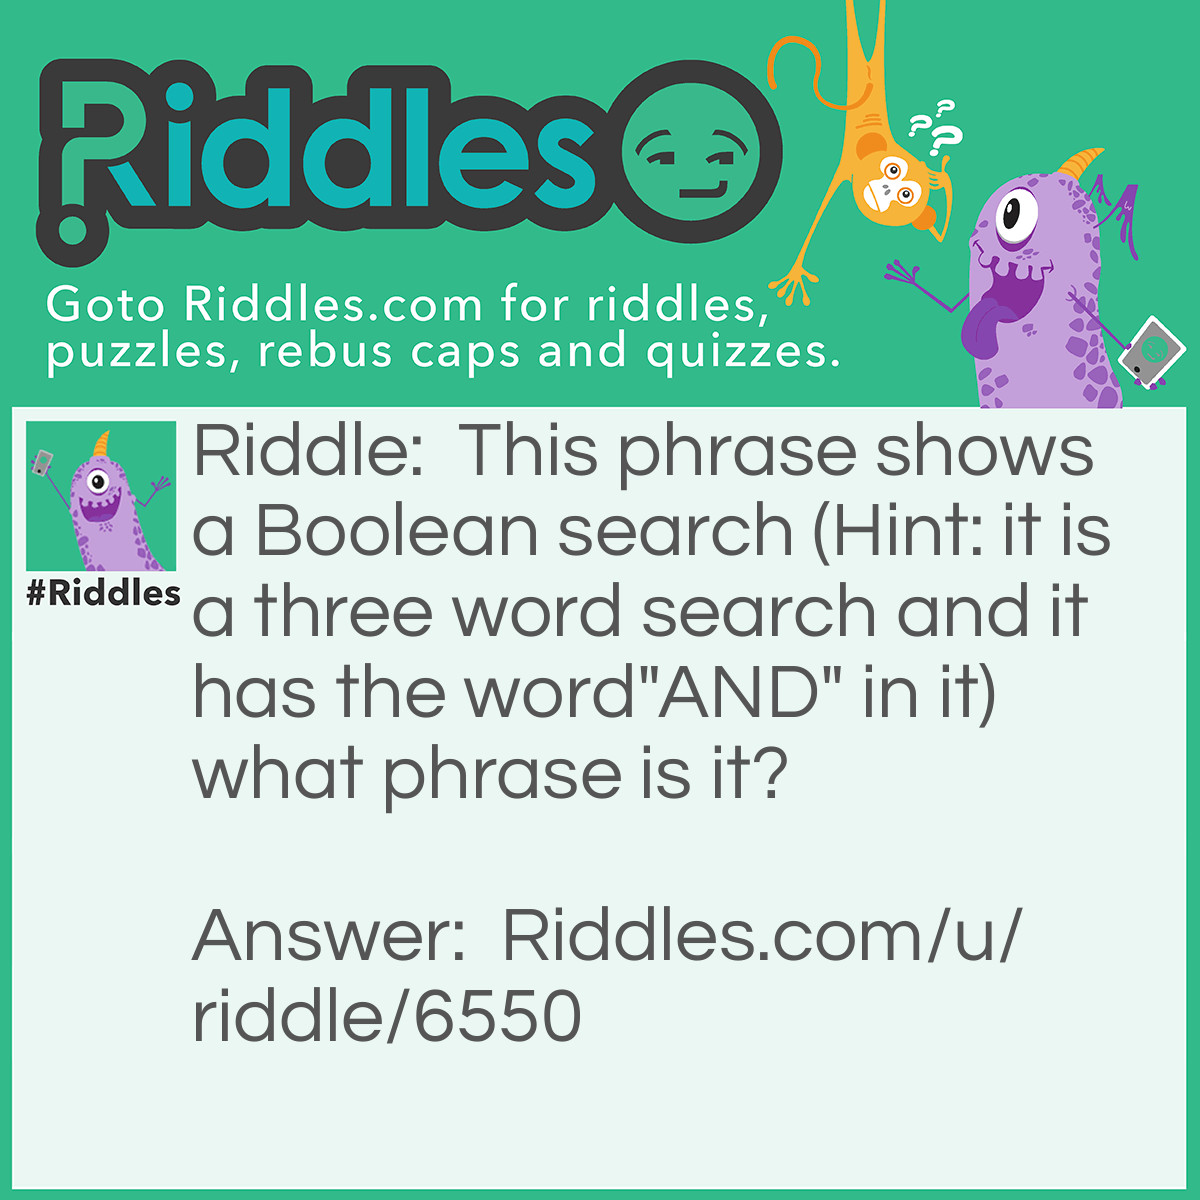 Riddle: This phrase shows a Boolean search (Hint: it is a three word search and it has the word"AND" in it) what phrase is it? Answer: chocolate AND cupcakes